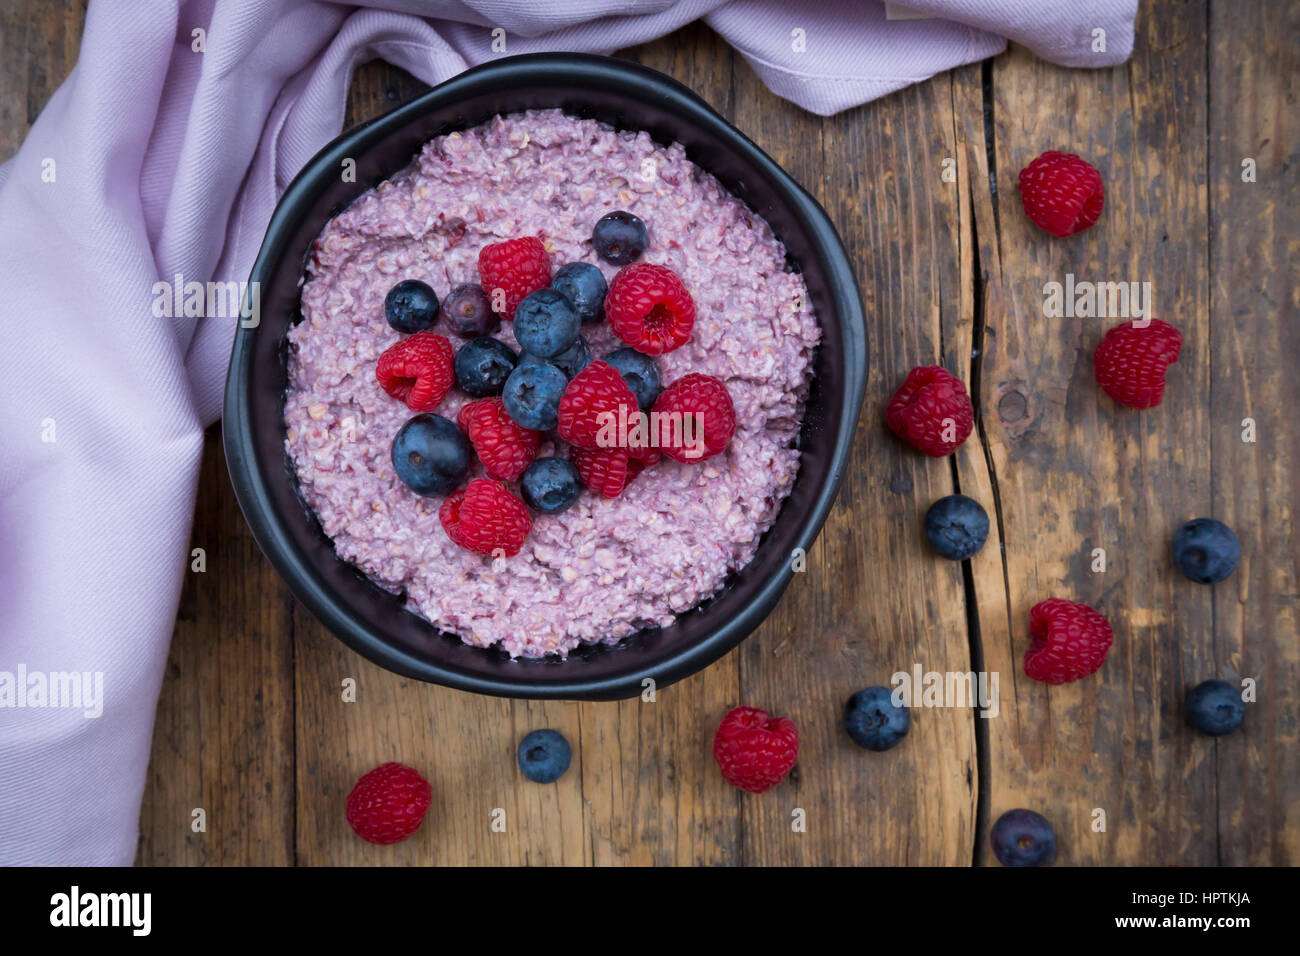 Bowl of overnight oats with blueberries and raspberries on wood Stock Photo